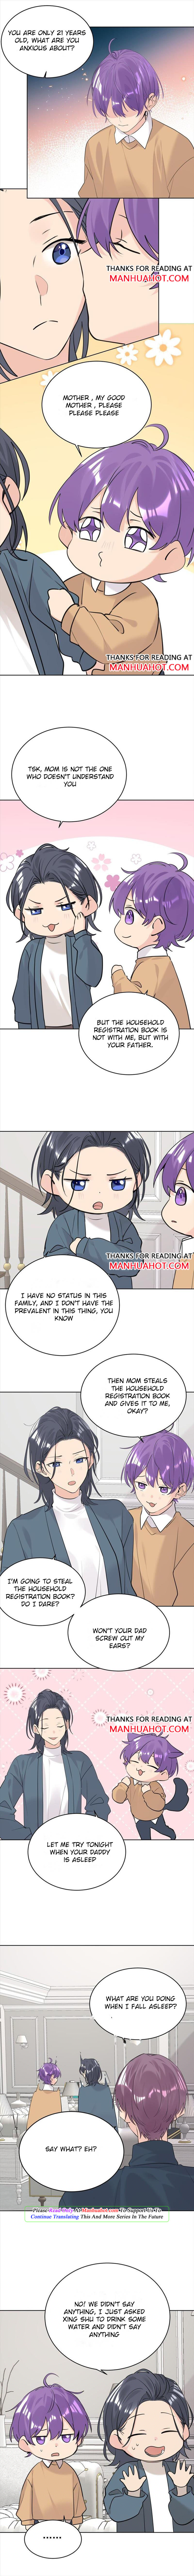 Did The Nerd Manage To Flirt With The Cutie Today? Chapter 86 #3